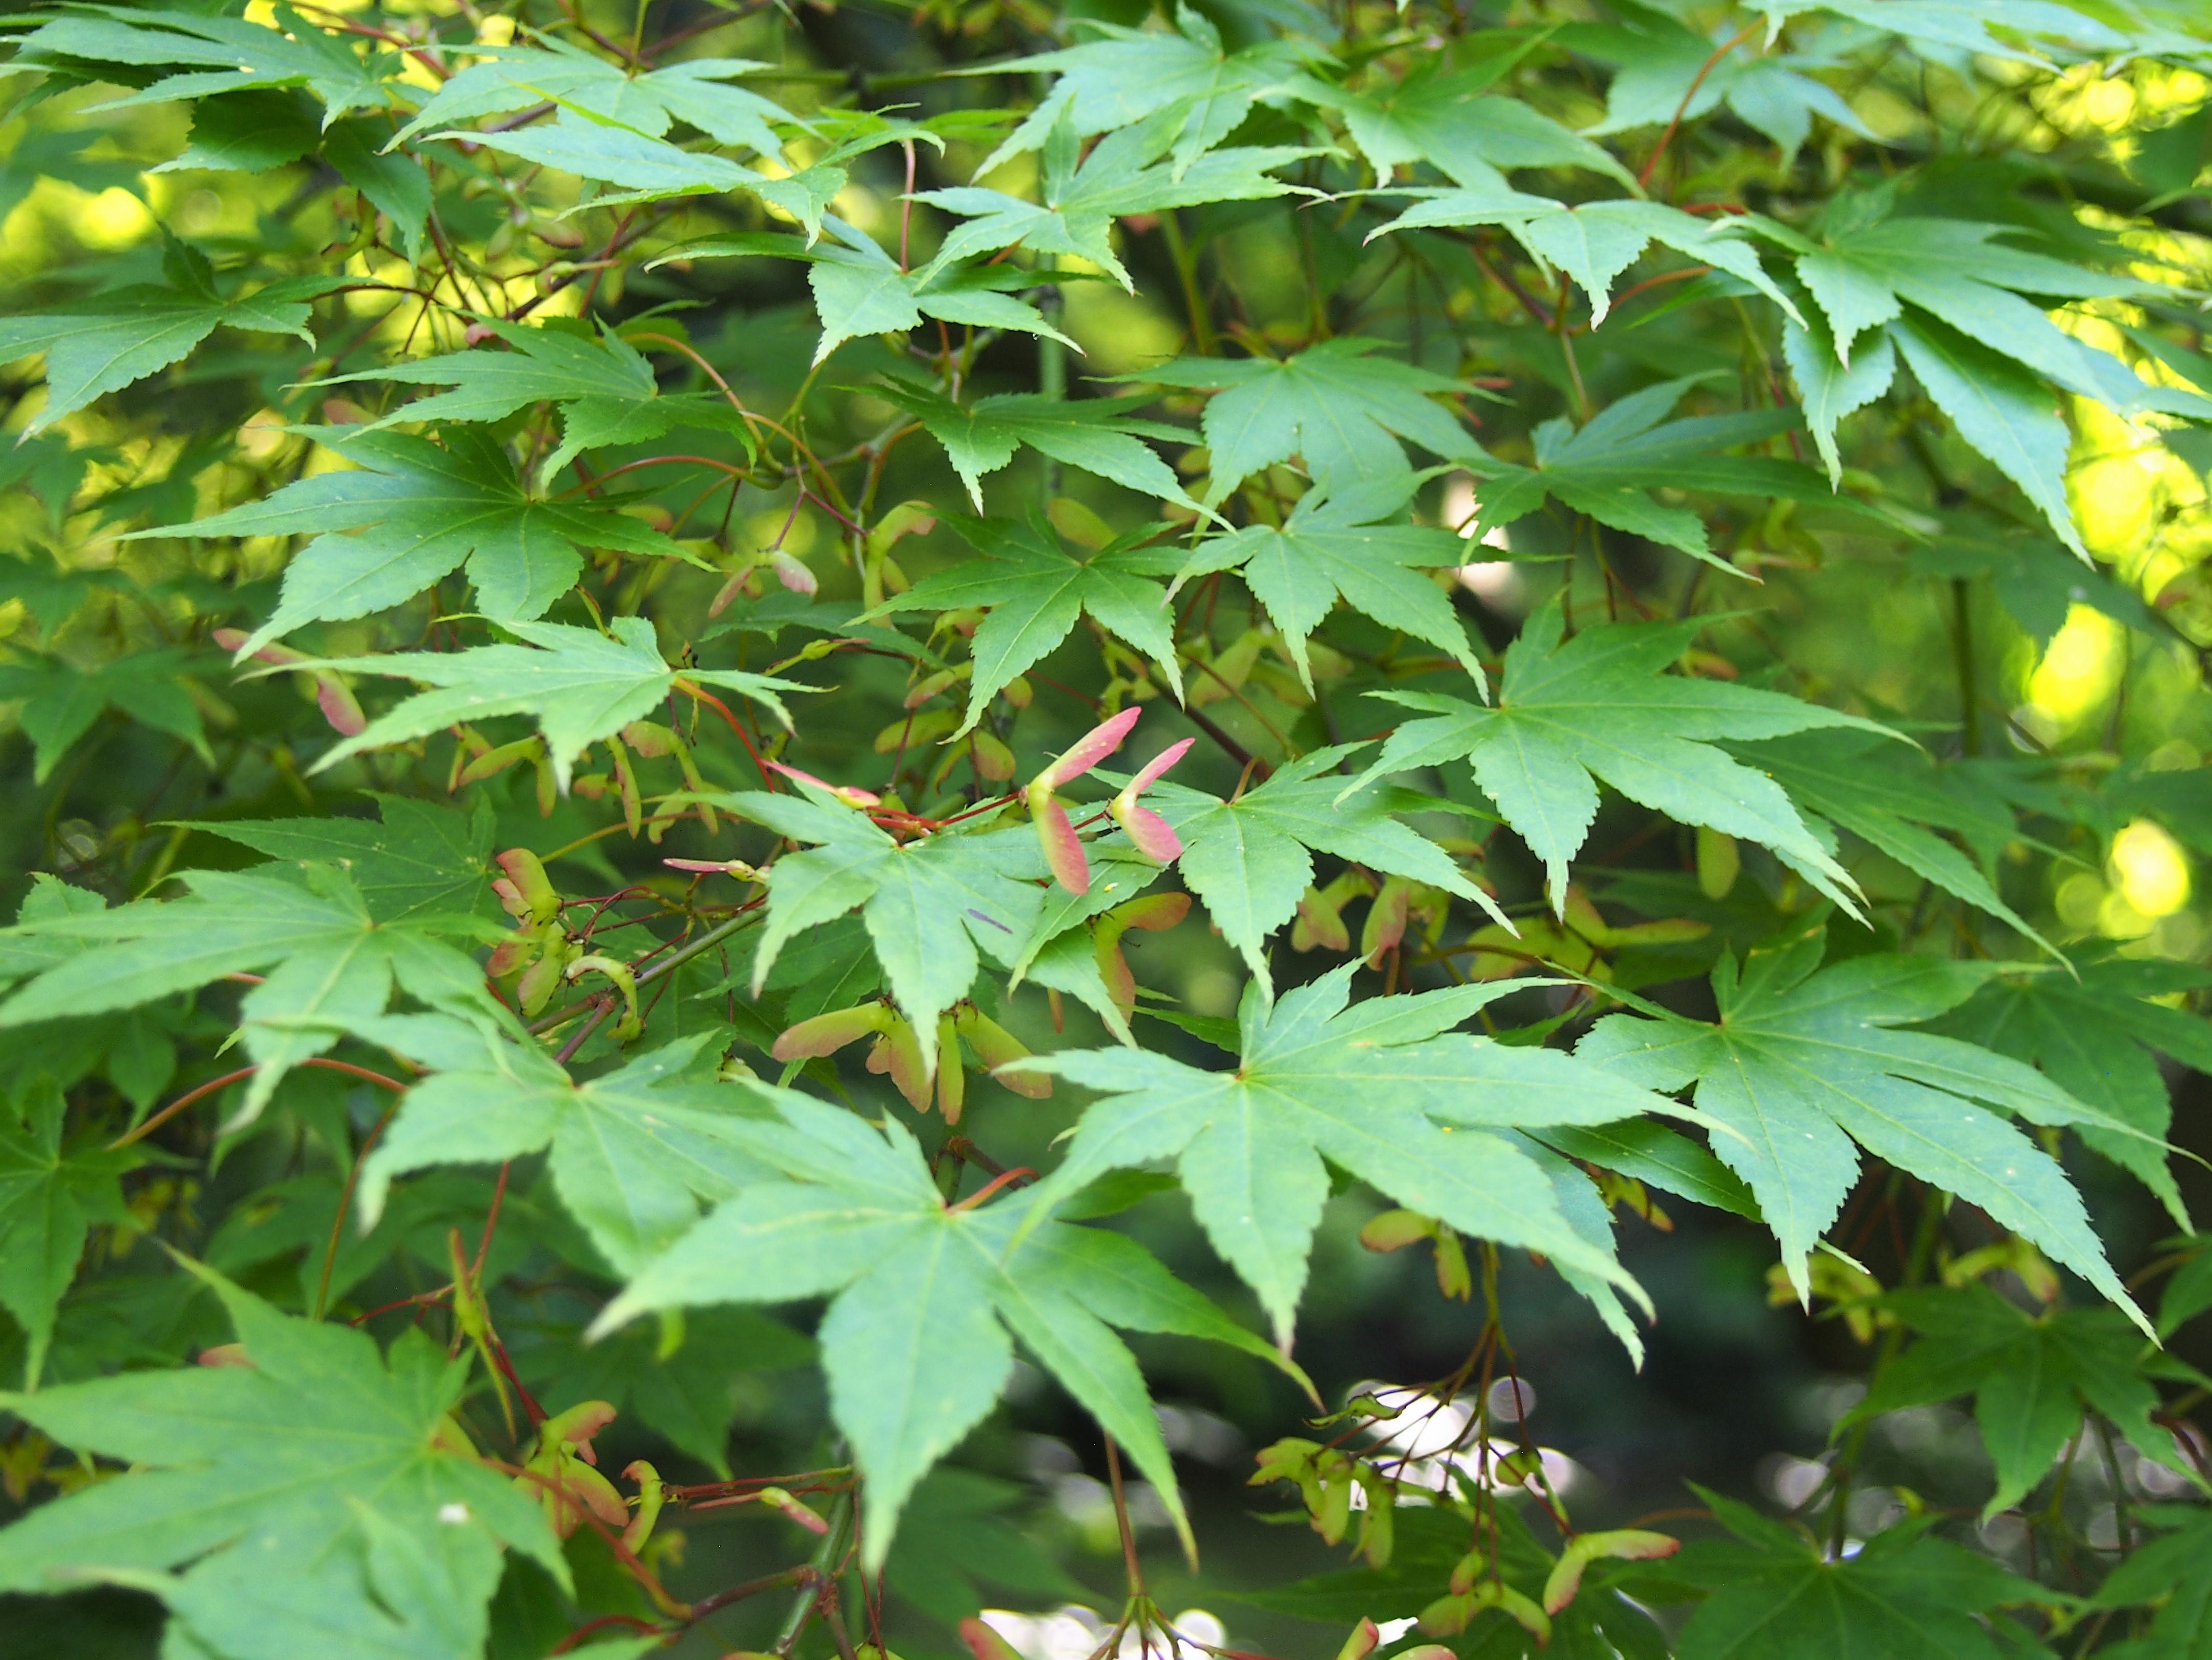 pink-green leaves with red-lime stems